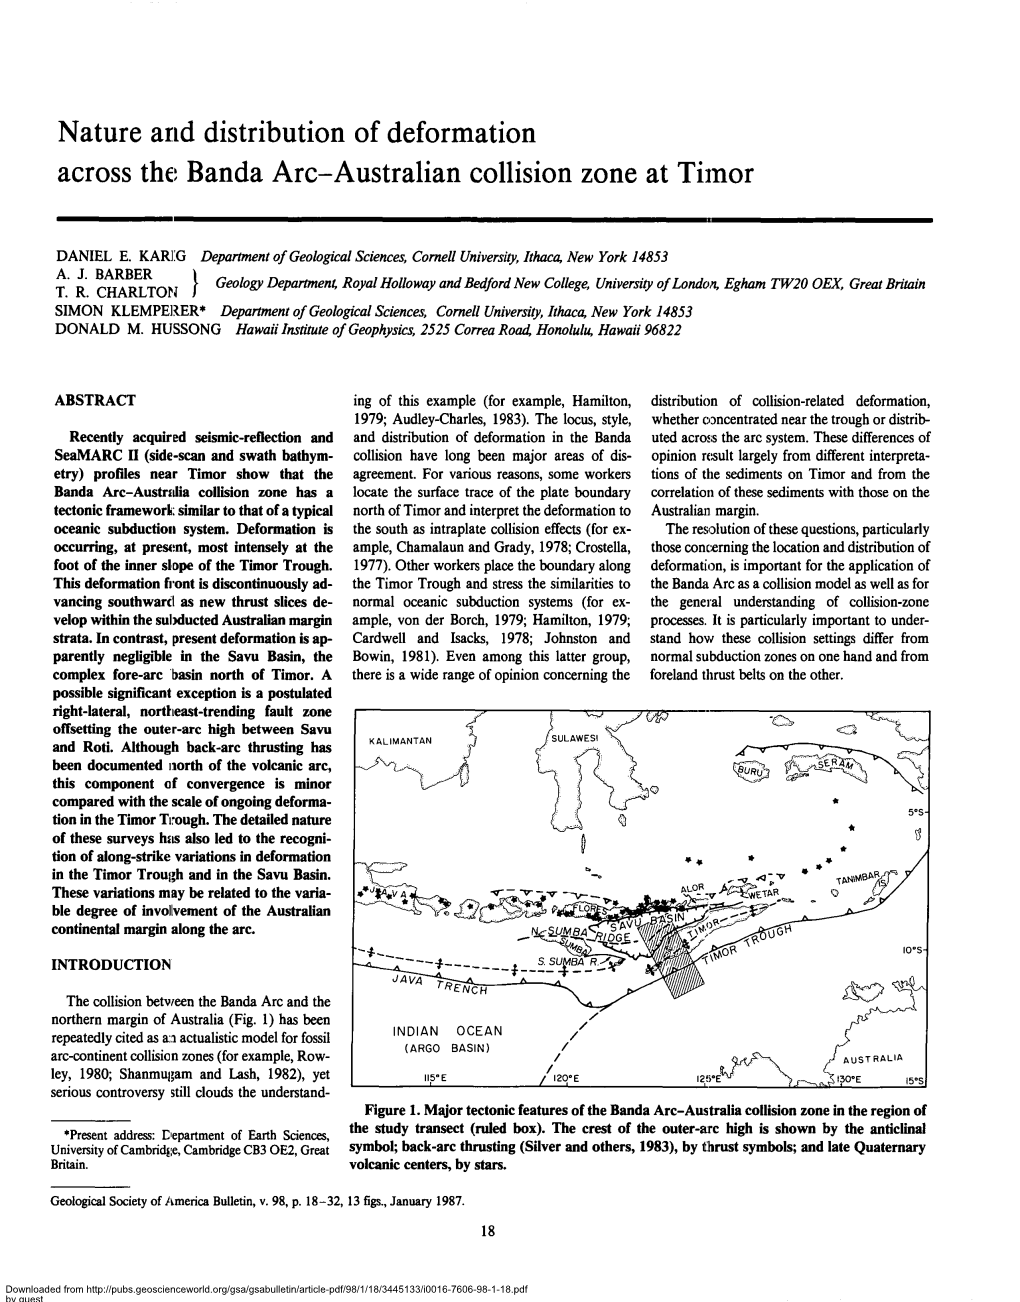 Nature and Distribution of Deformation Across the Banda Arc-Australian Collision Zone at Timor